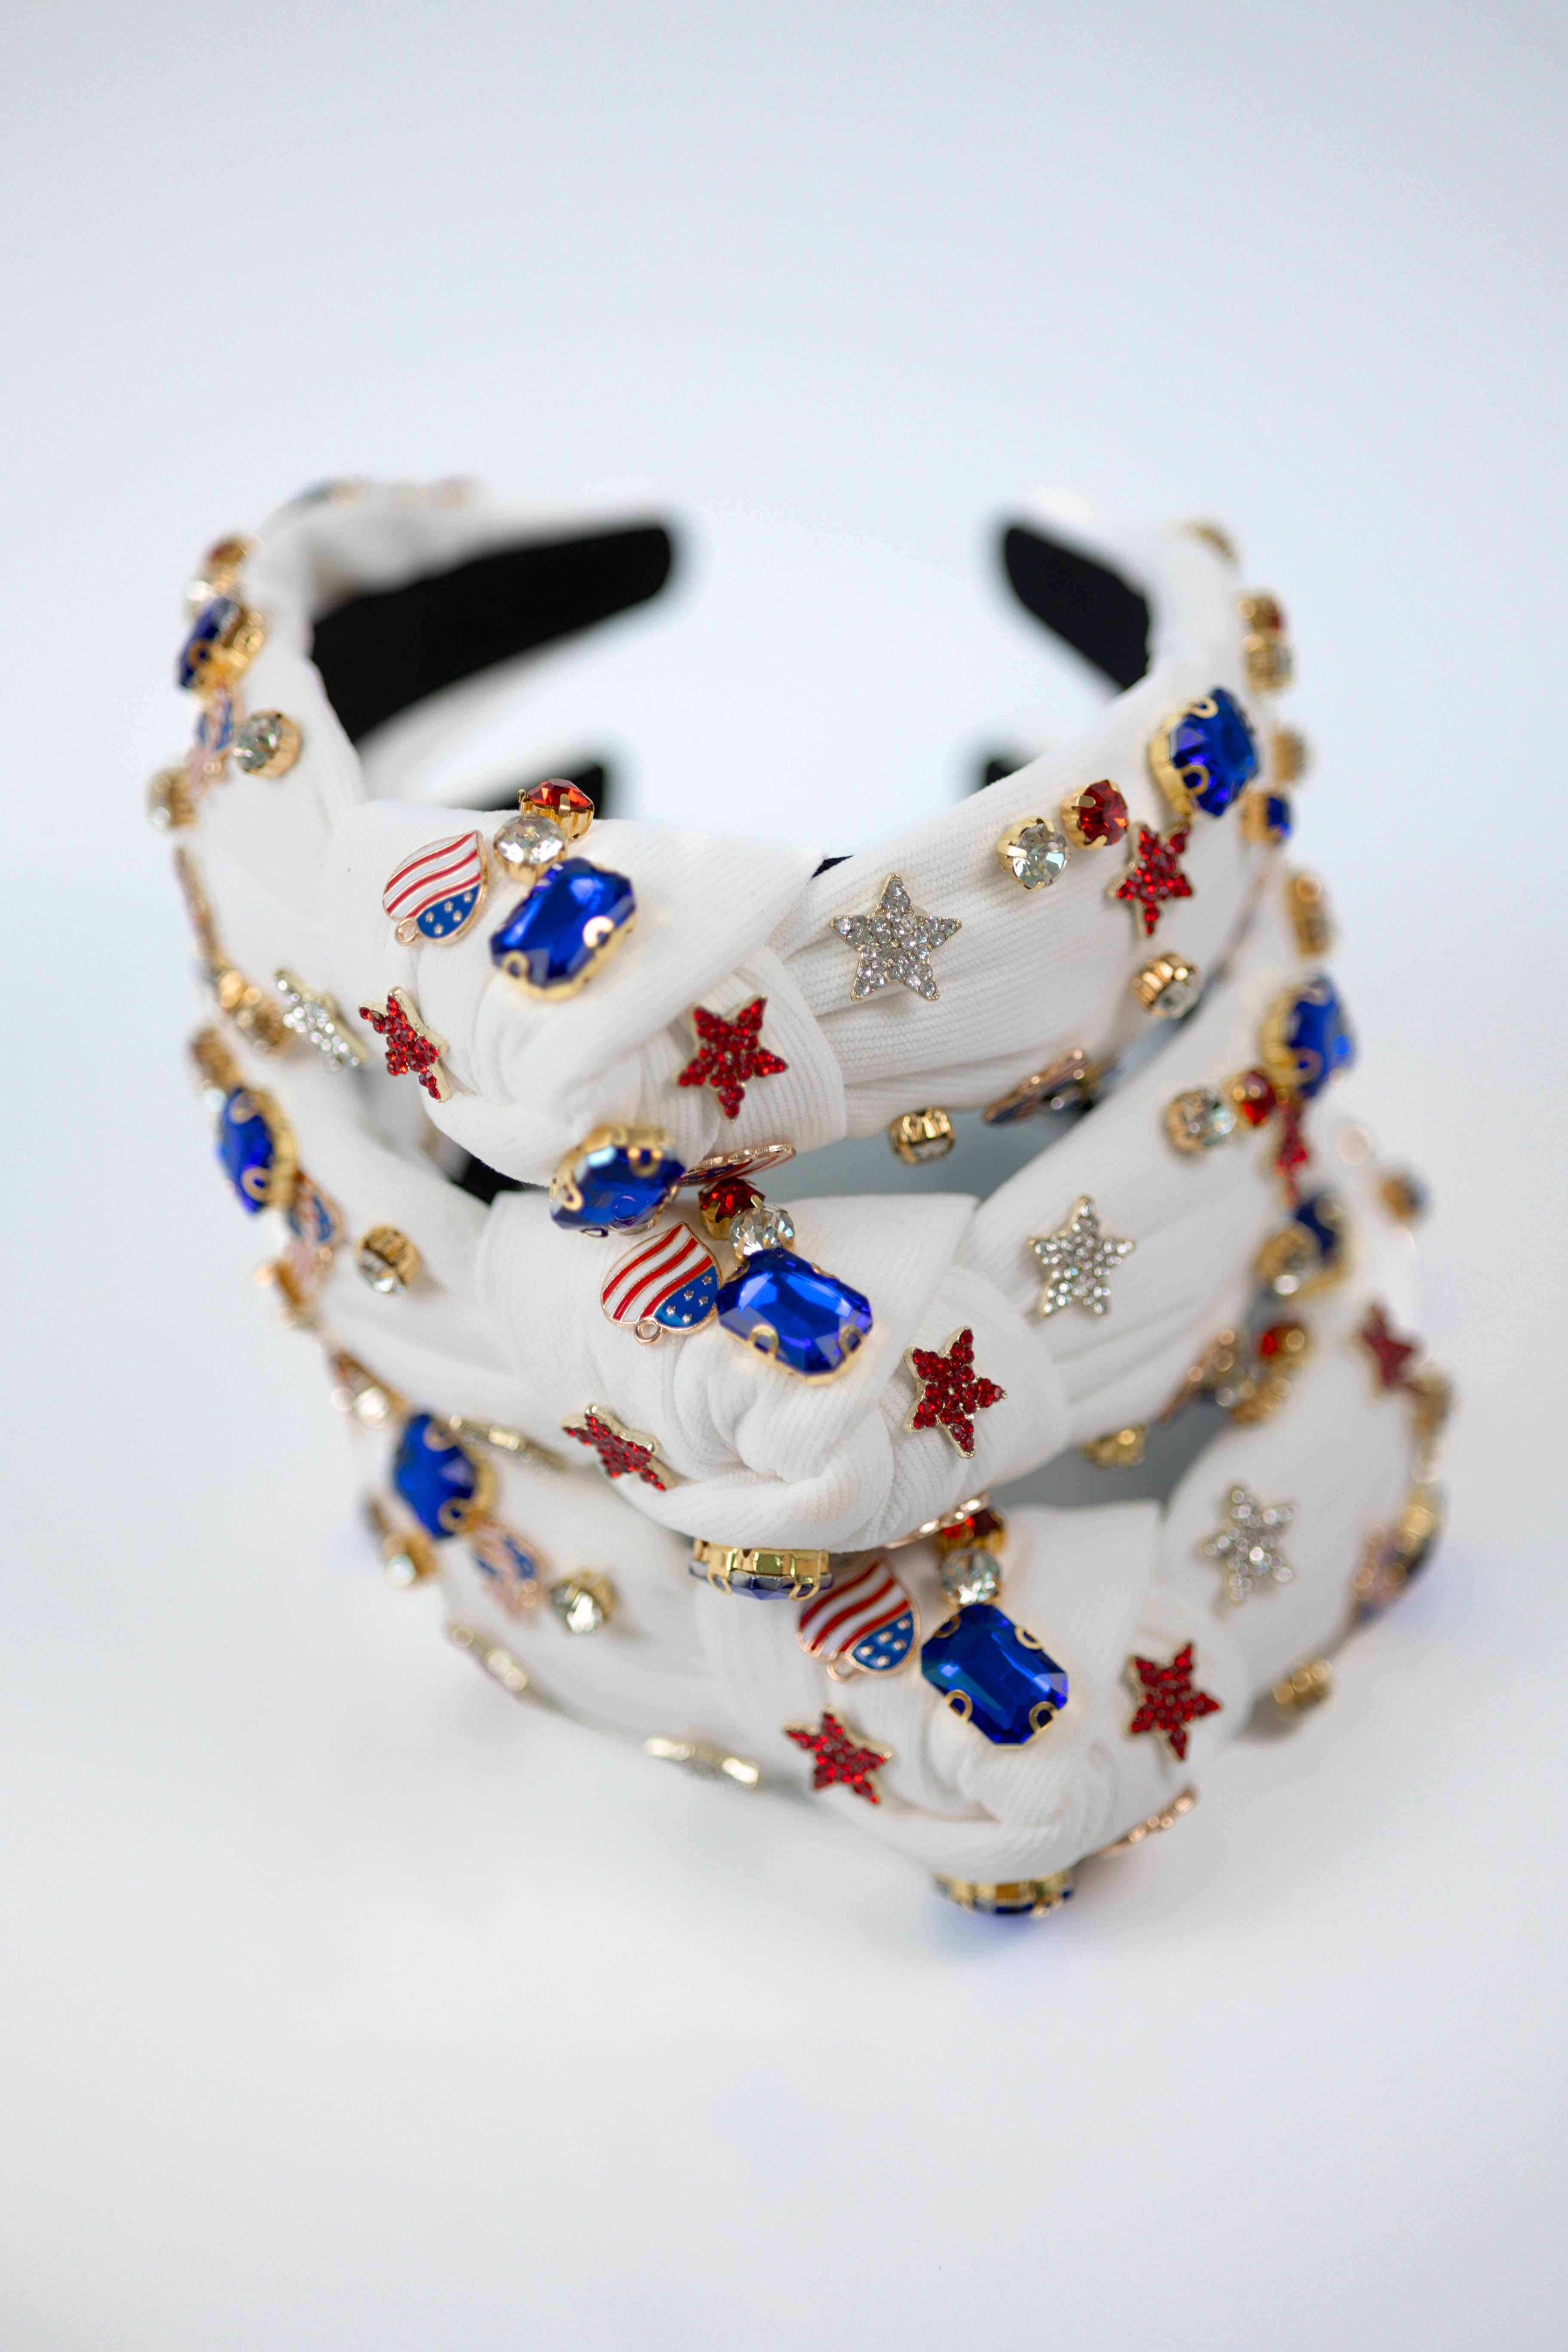 Beaded Headband - Red, White, and Bling